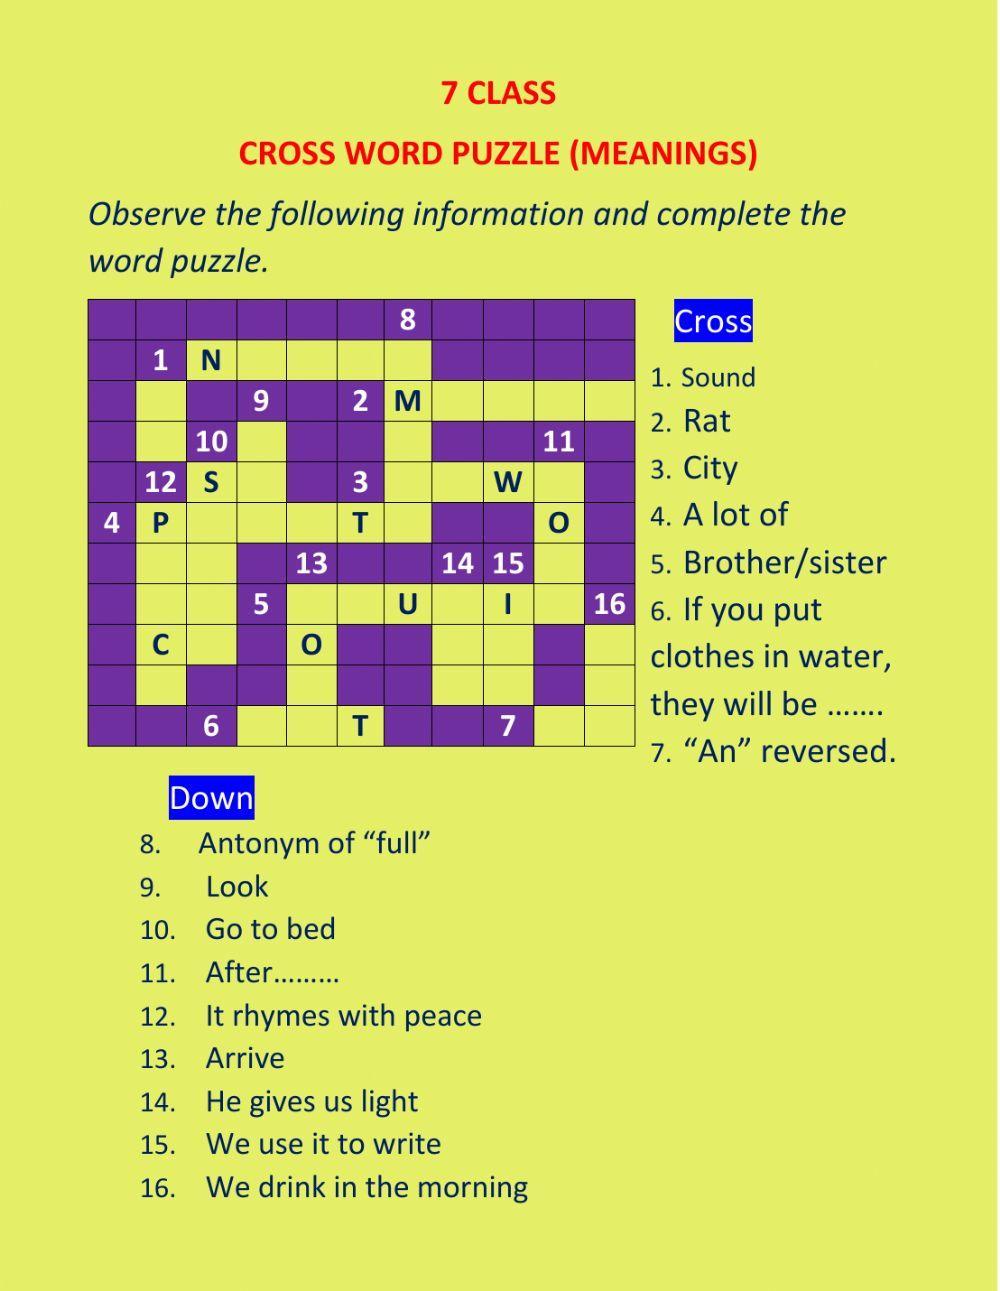 7 class cross word puzzle